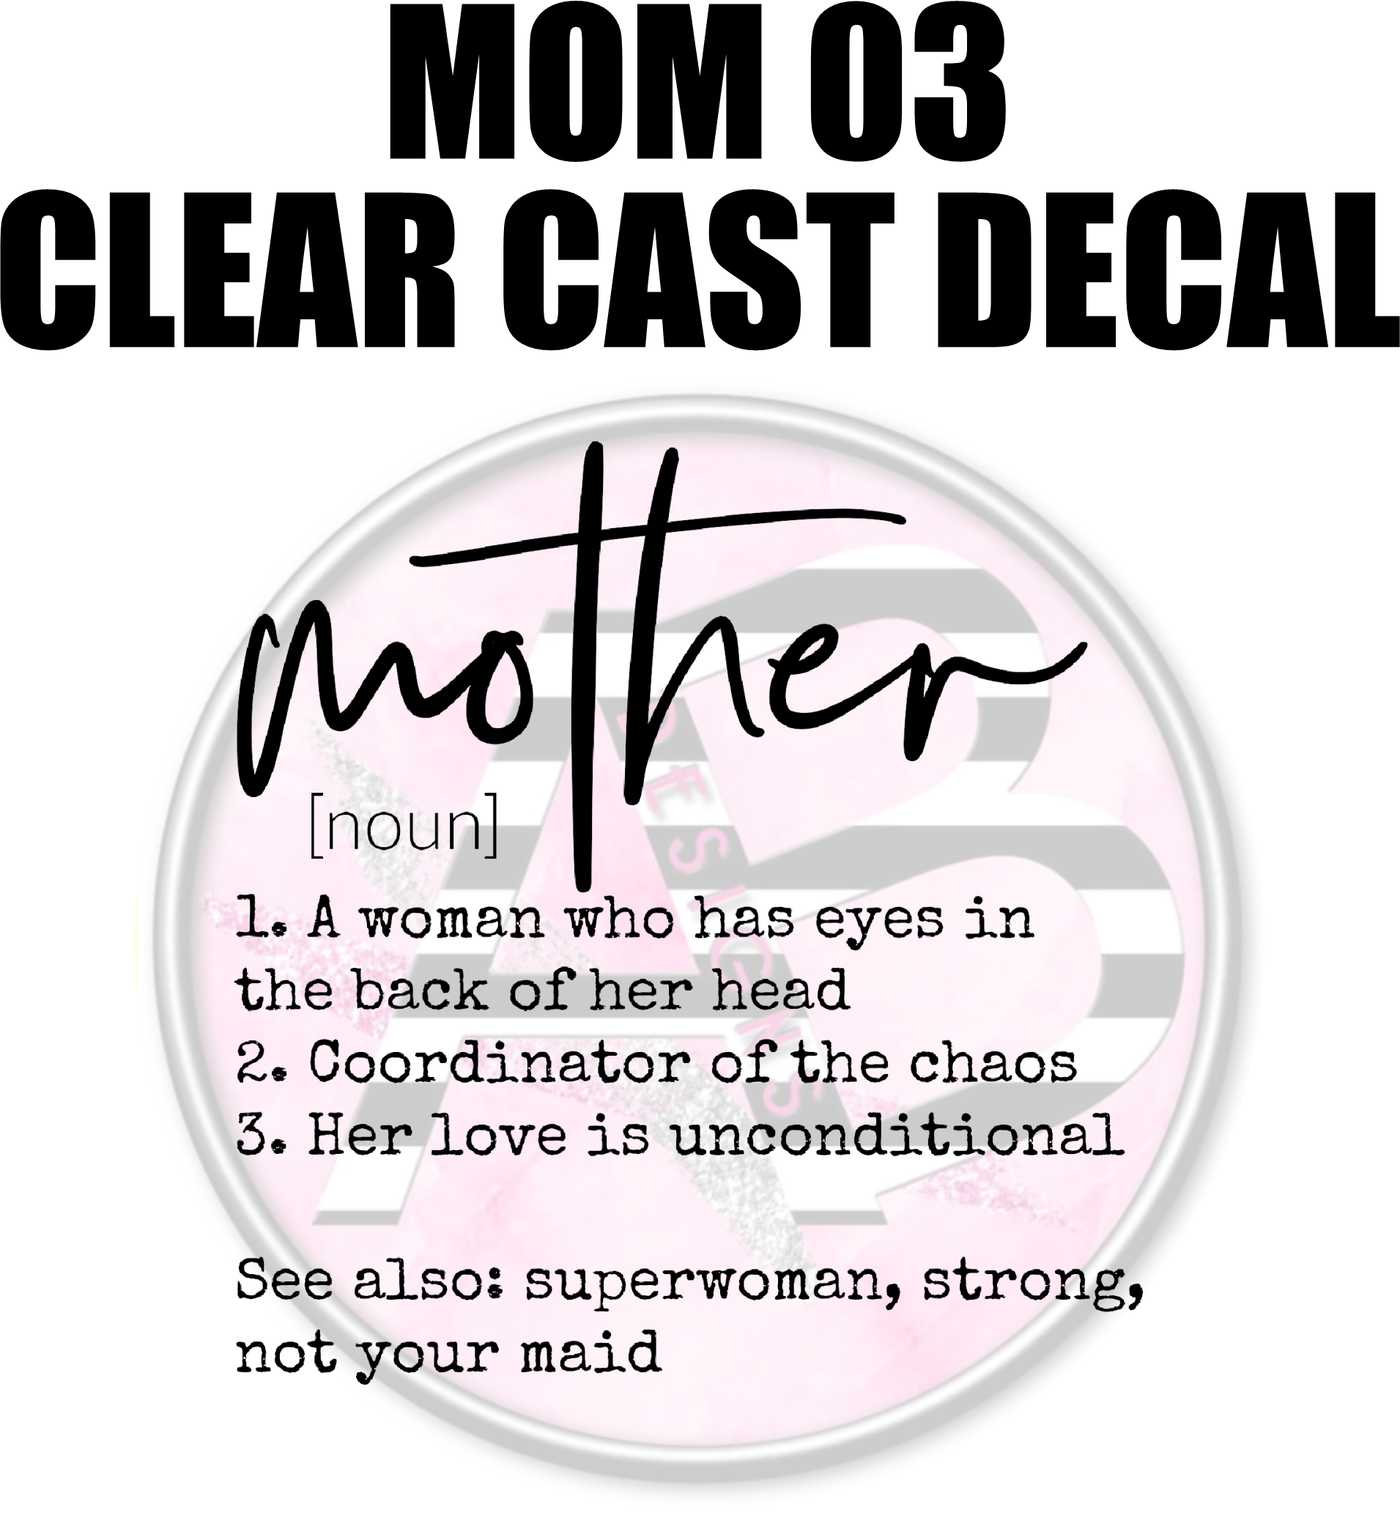 Mom 03 - Clear Cast Decal